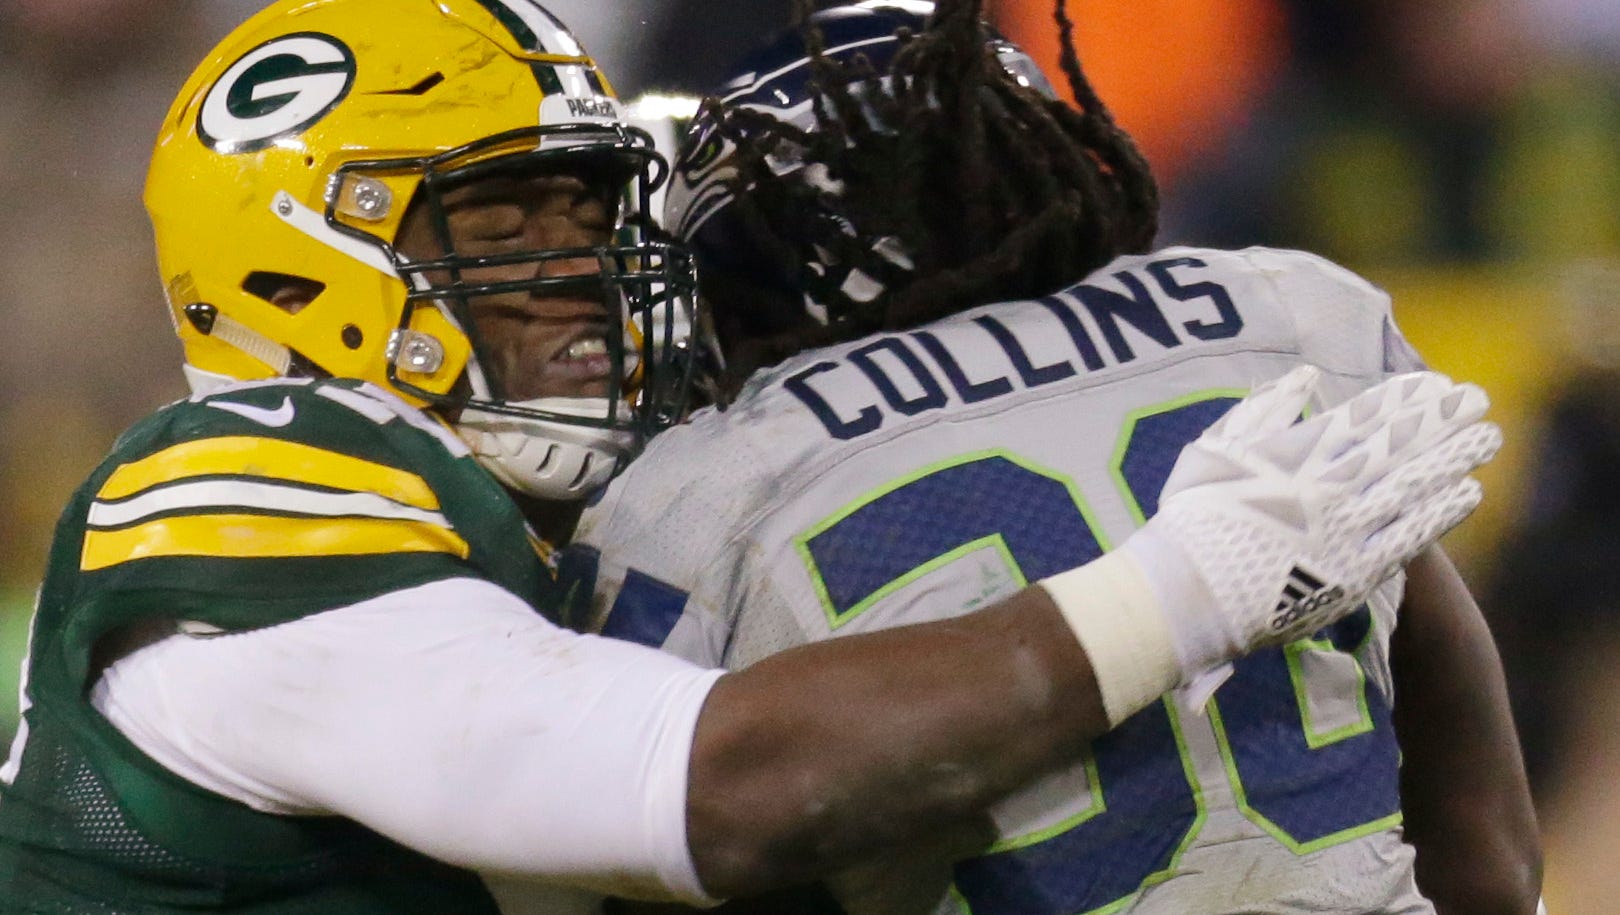 Green Bay Packers nose tackle Kenny Clark (97) Seattle Seahawks running back Alex Collins (36) dead inhistracks for a one yard gain during the fourth quarter of their game Sunday, December 11, 2016 at Lambeau Field in Green Bay, Wis. The Green Bay Packers beat the Seattle Seahawks 38-10.